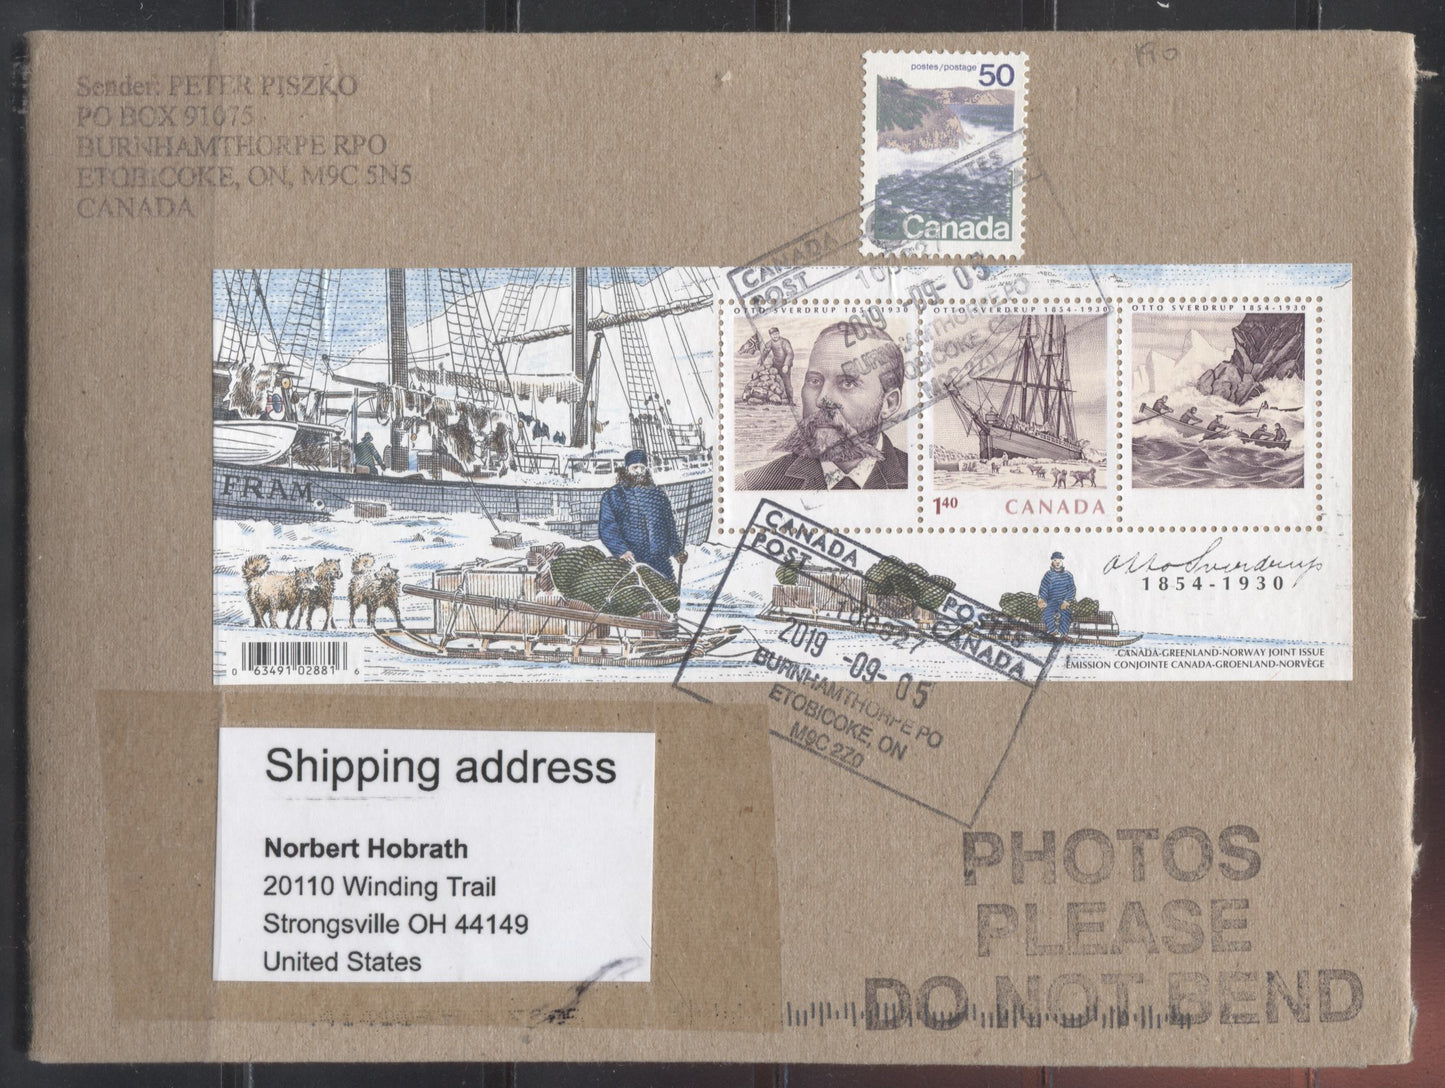 Lot 9 Canada #2027, 598v 2004 Otto Sverdrup Issue, a Single Use of the Souvenir Sheet on a 2019 Oversize Cover to the US